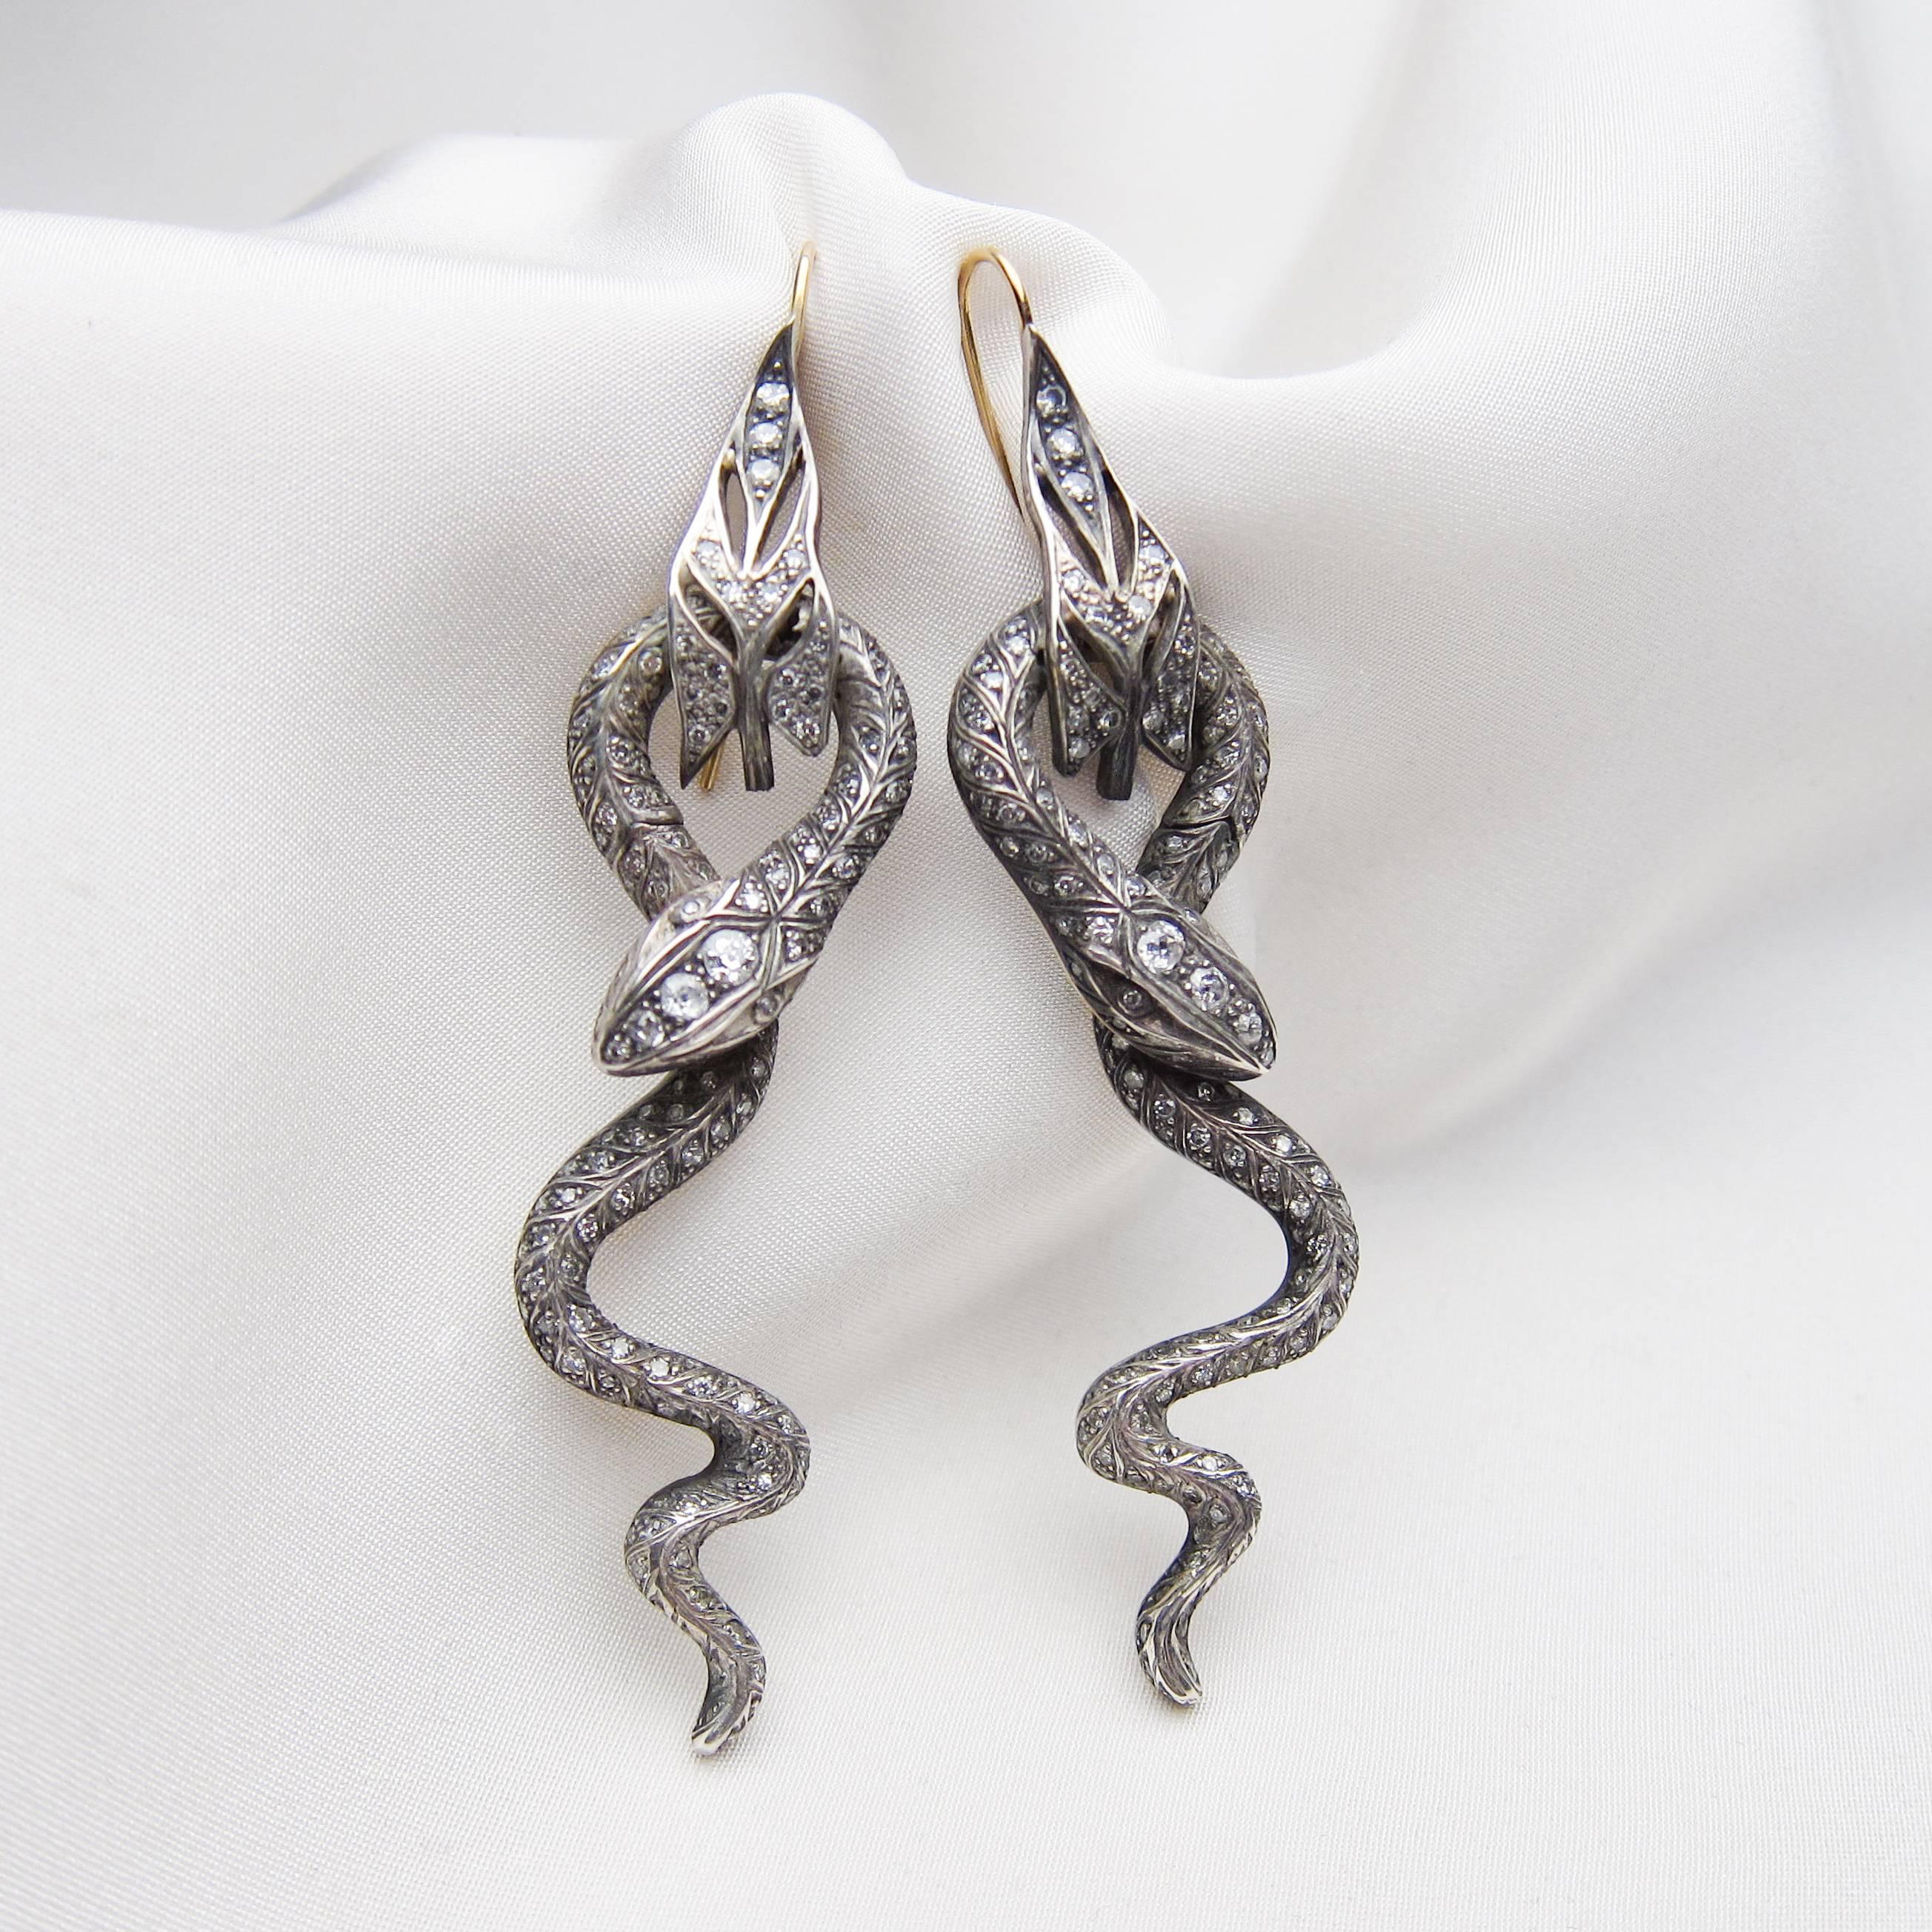 Circa 1900s. These spectacular late-Victorian earrings feature silver-topped 14KT gold snakes slathered with diamonds. Each earring is pave-set with three old European-cut diamonds and 177 single-cut diamonds. The old European-cut diamonds weigh .44